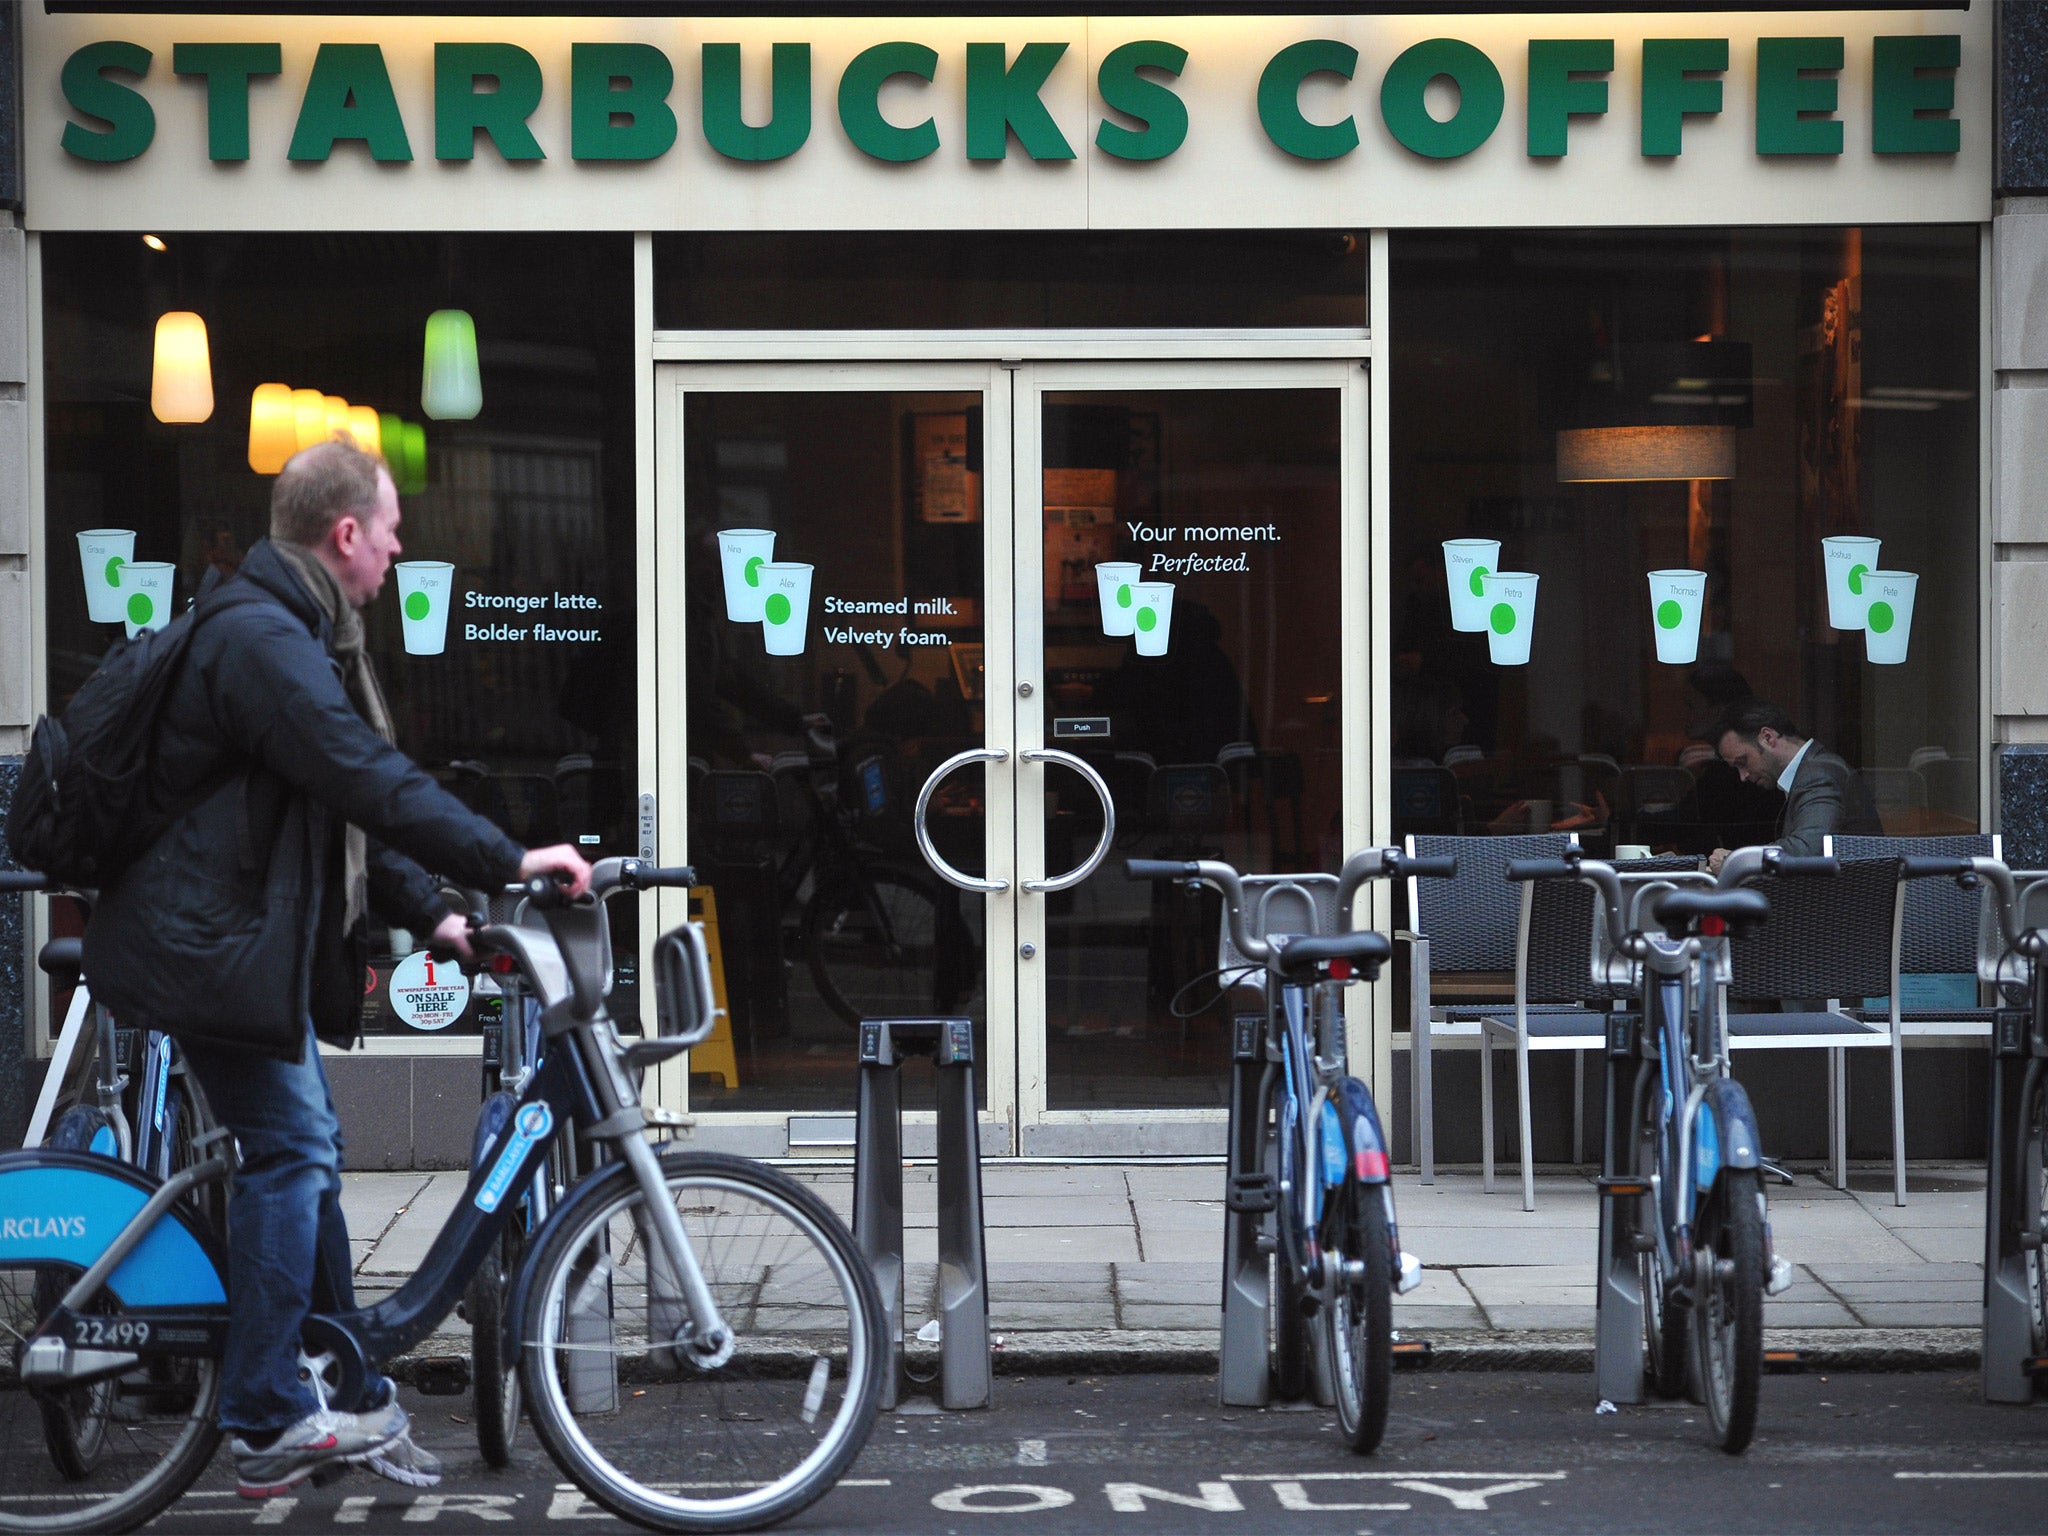 A branch of Starbucks in central London